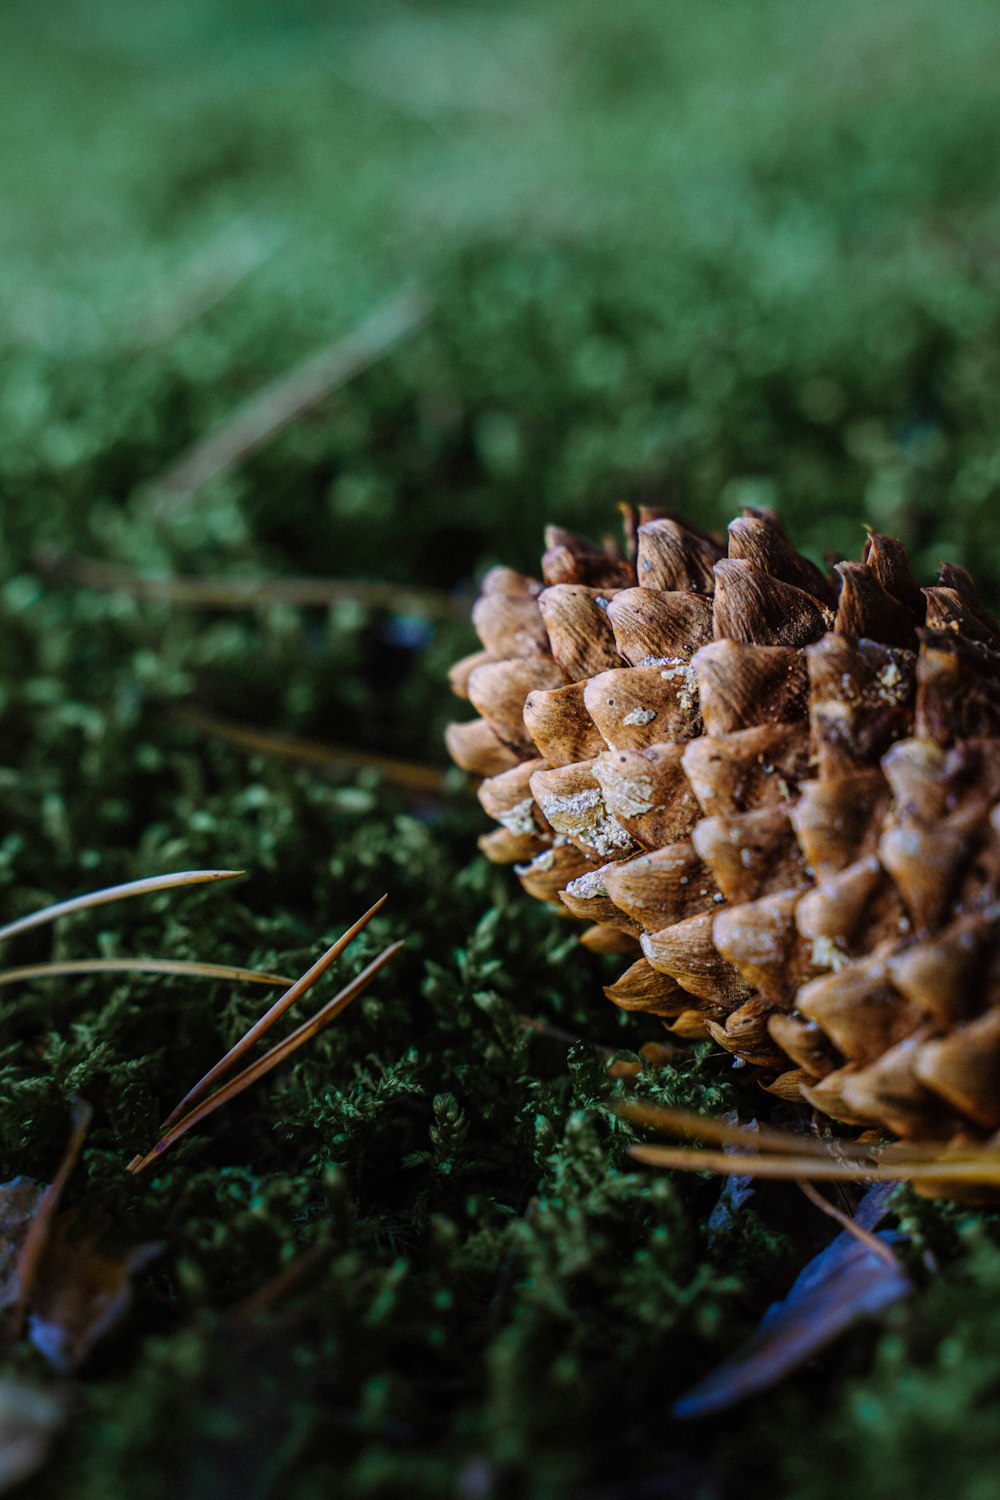 a close up of a pine cone on a mossy surface